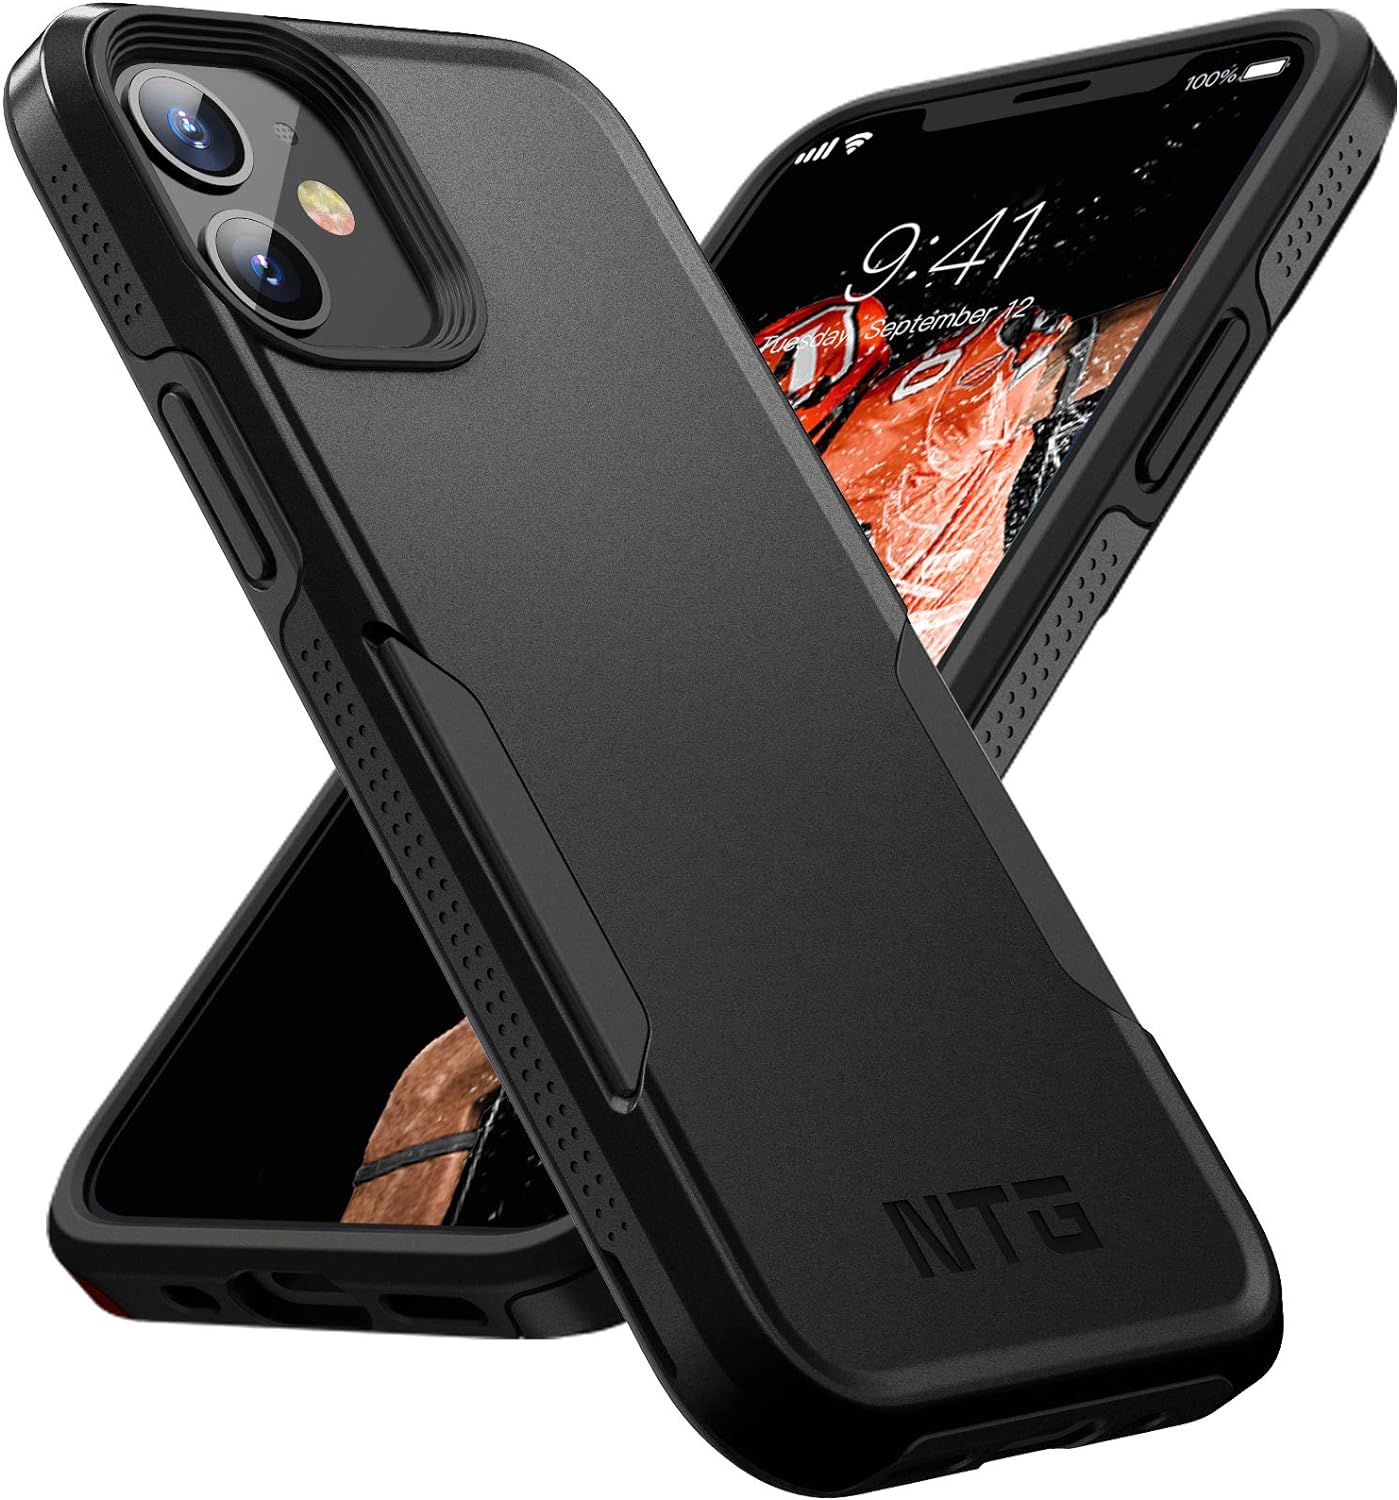 NTG Military Shockproof iPhone 12 Case [2 Layer Structure][Military Grade Anti-Drop] Hard Slim iPhon